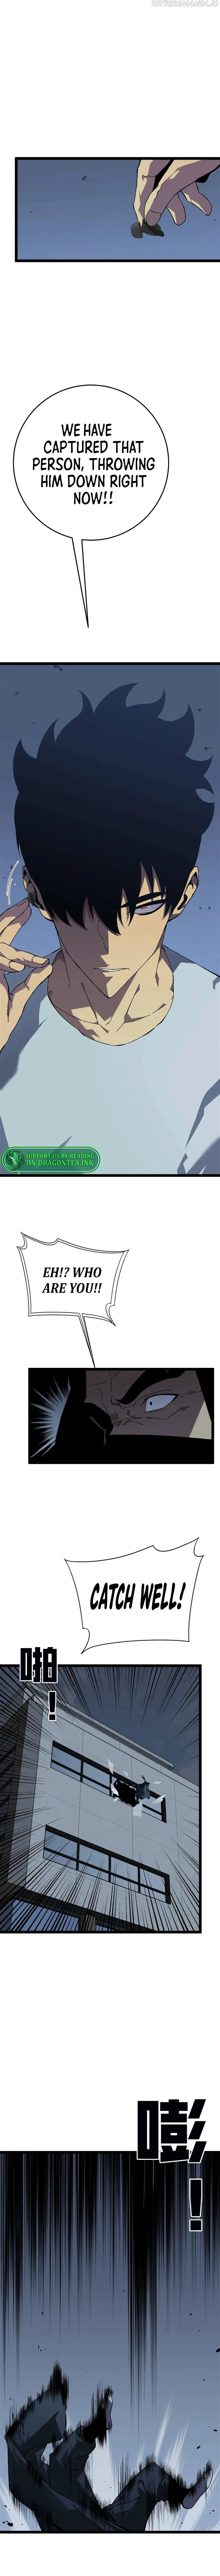 I Can Copy Talents Chapter 40 page 7